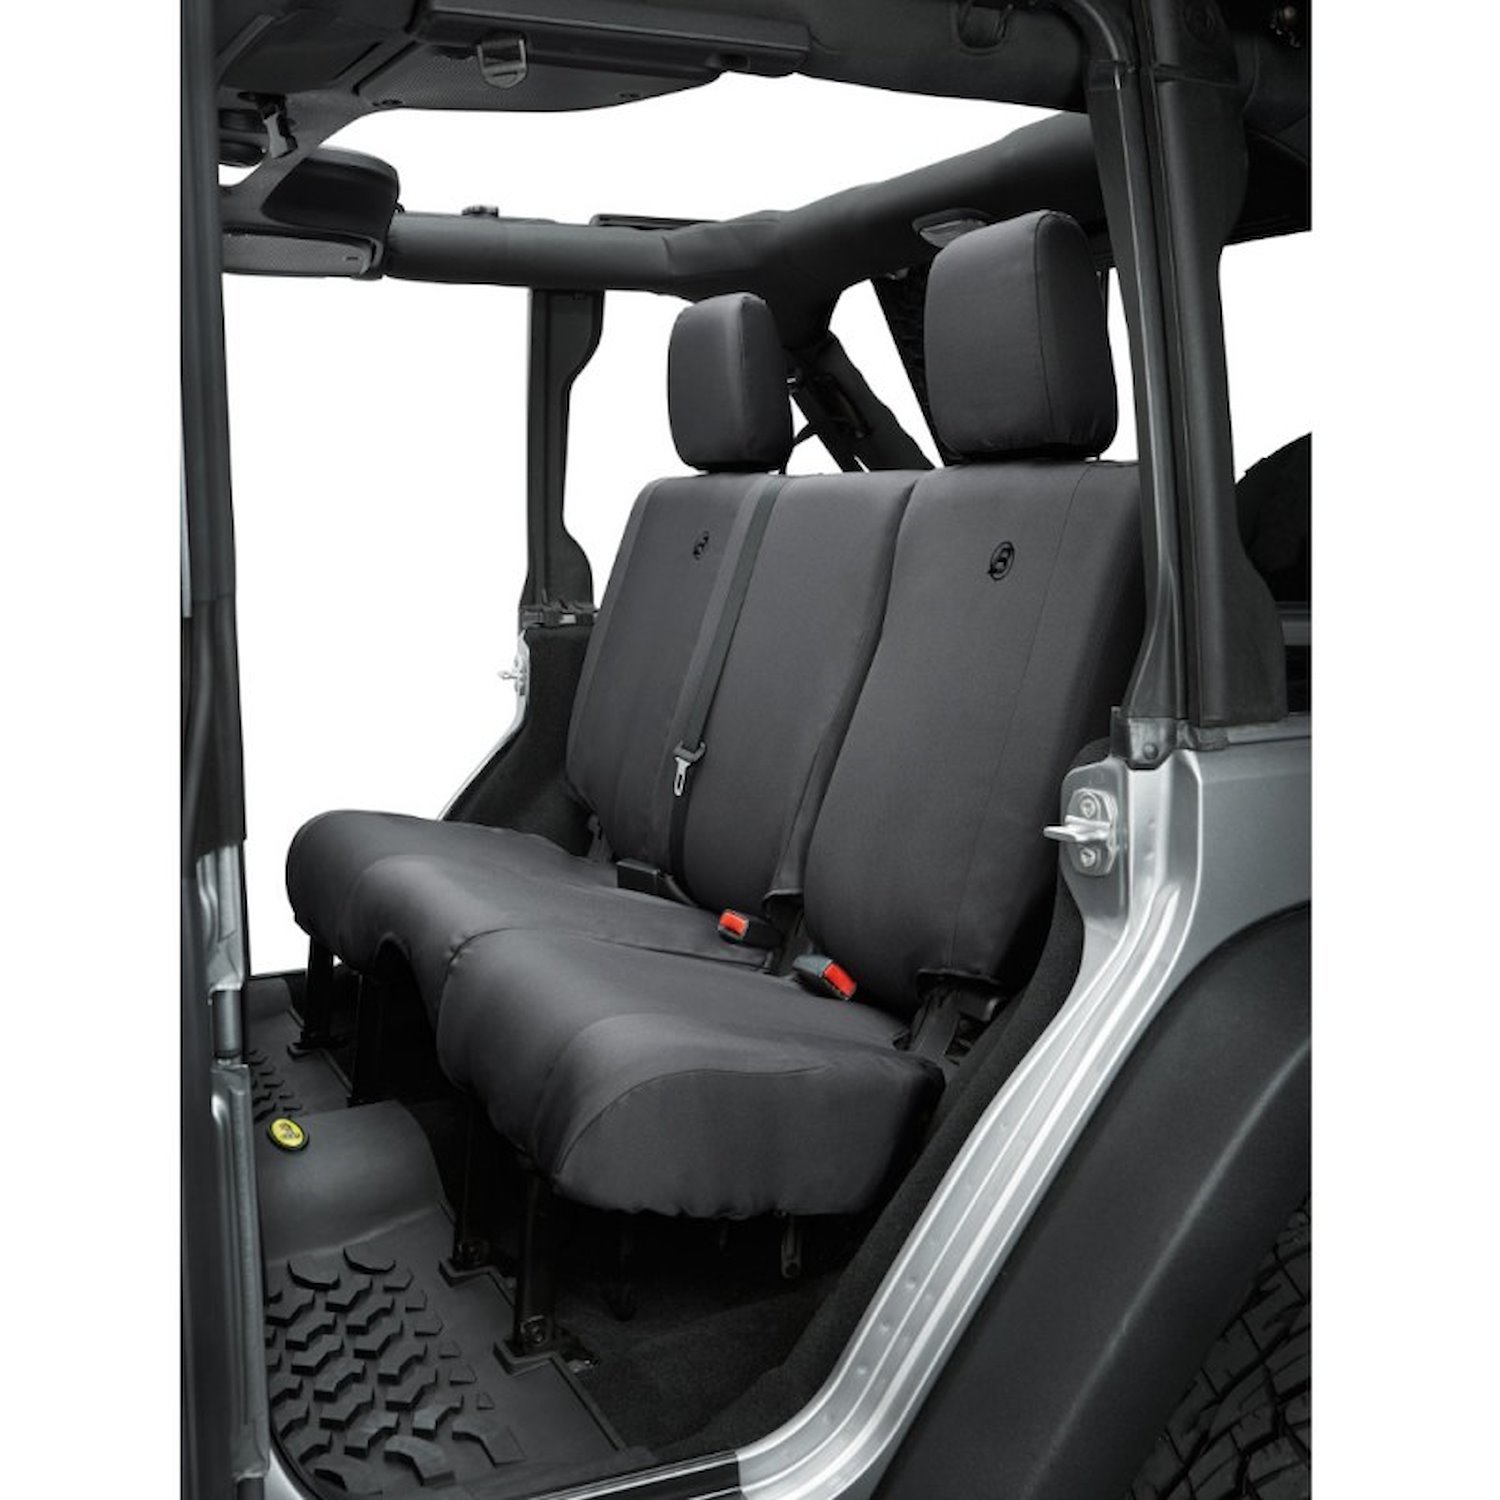 Seat Covers, Black Diamond, Fits Factory Seats w/o Fold Down Arm Rests, Sold Individually,